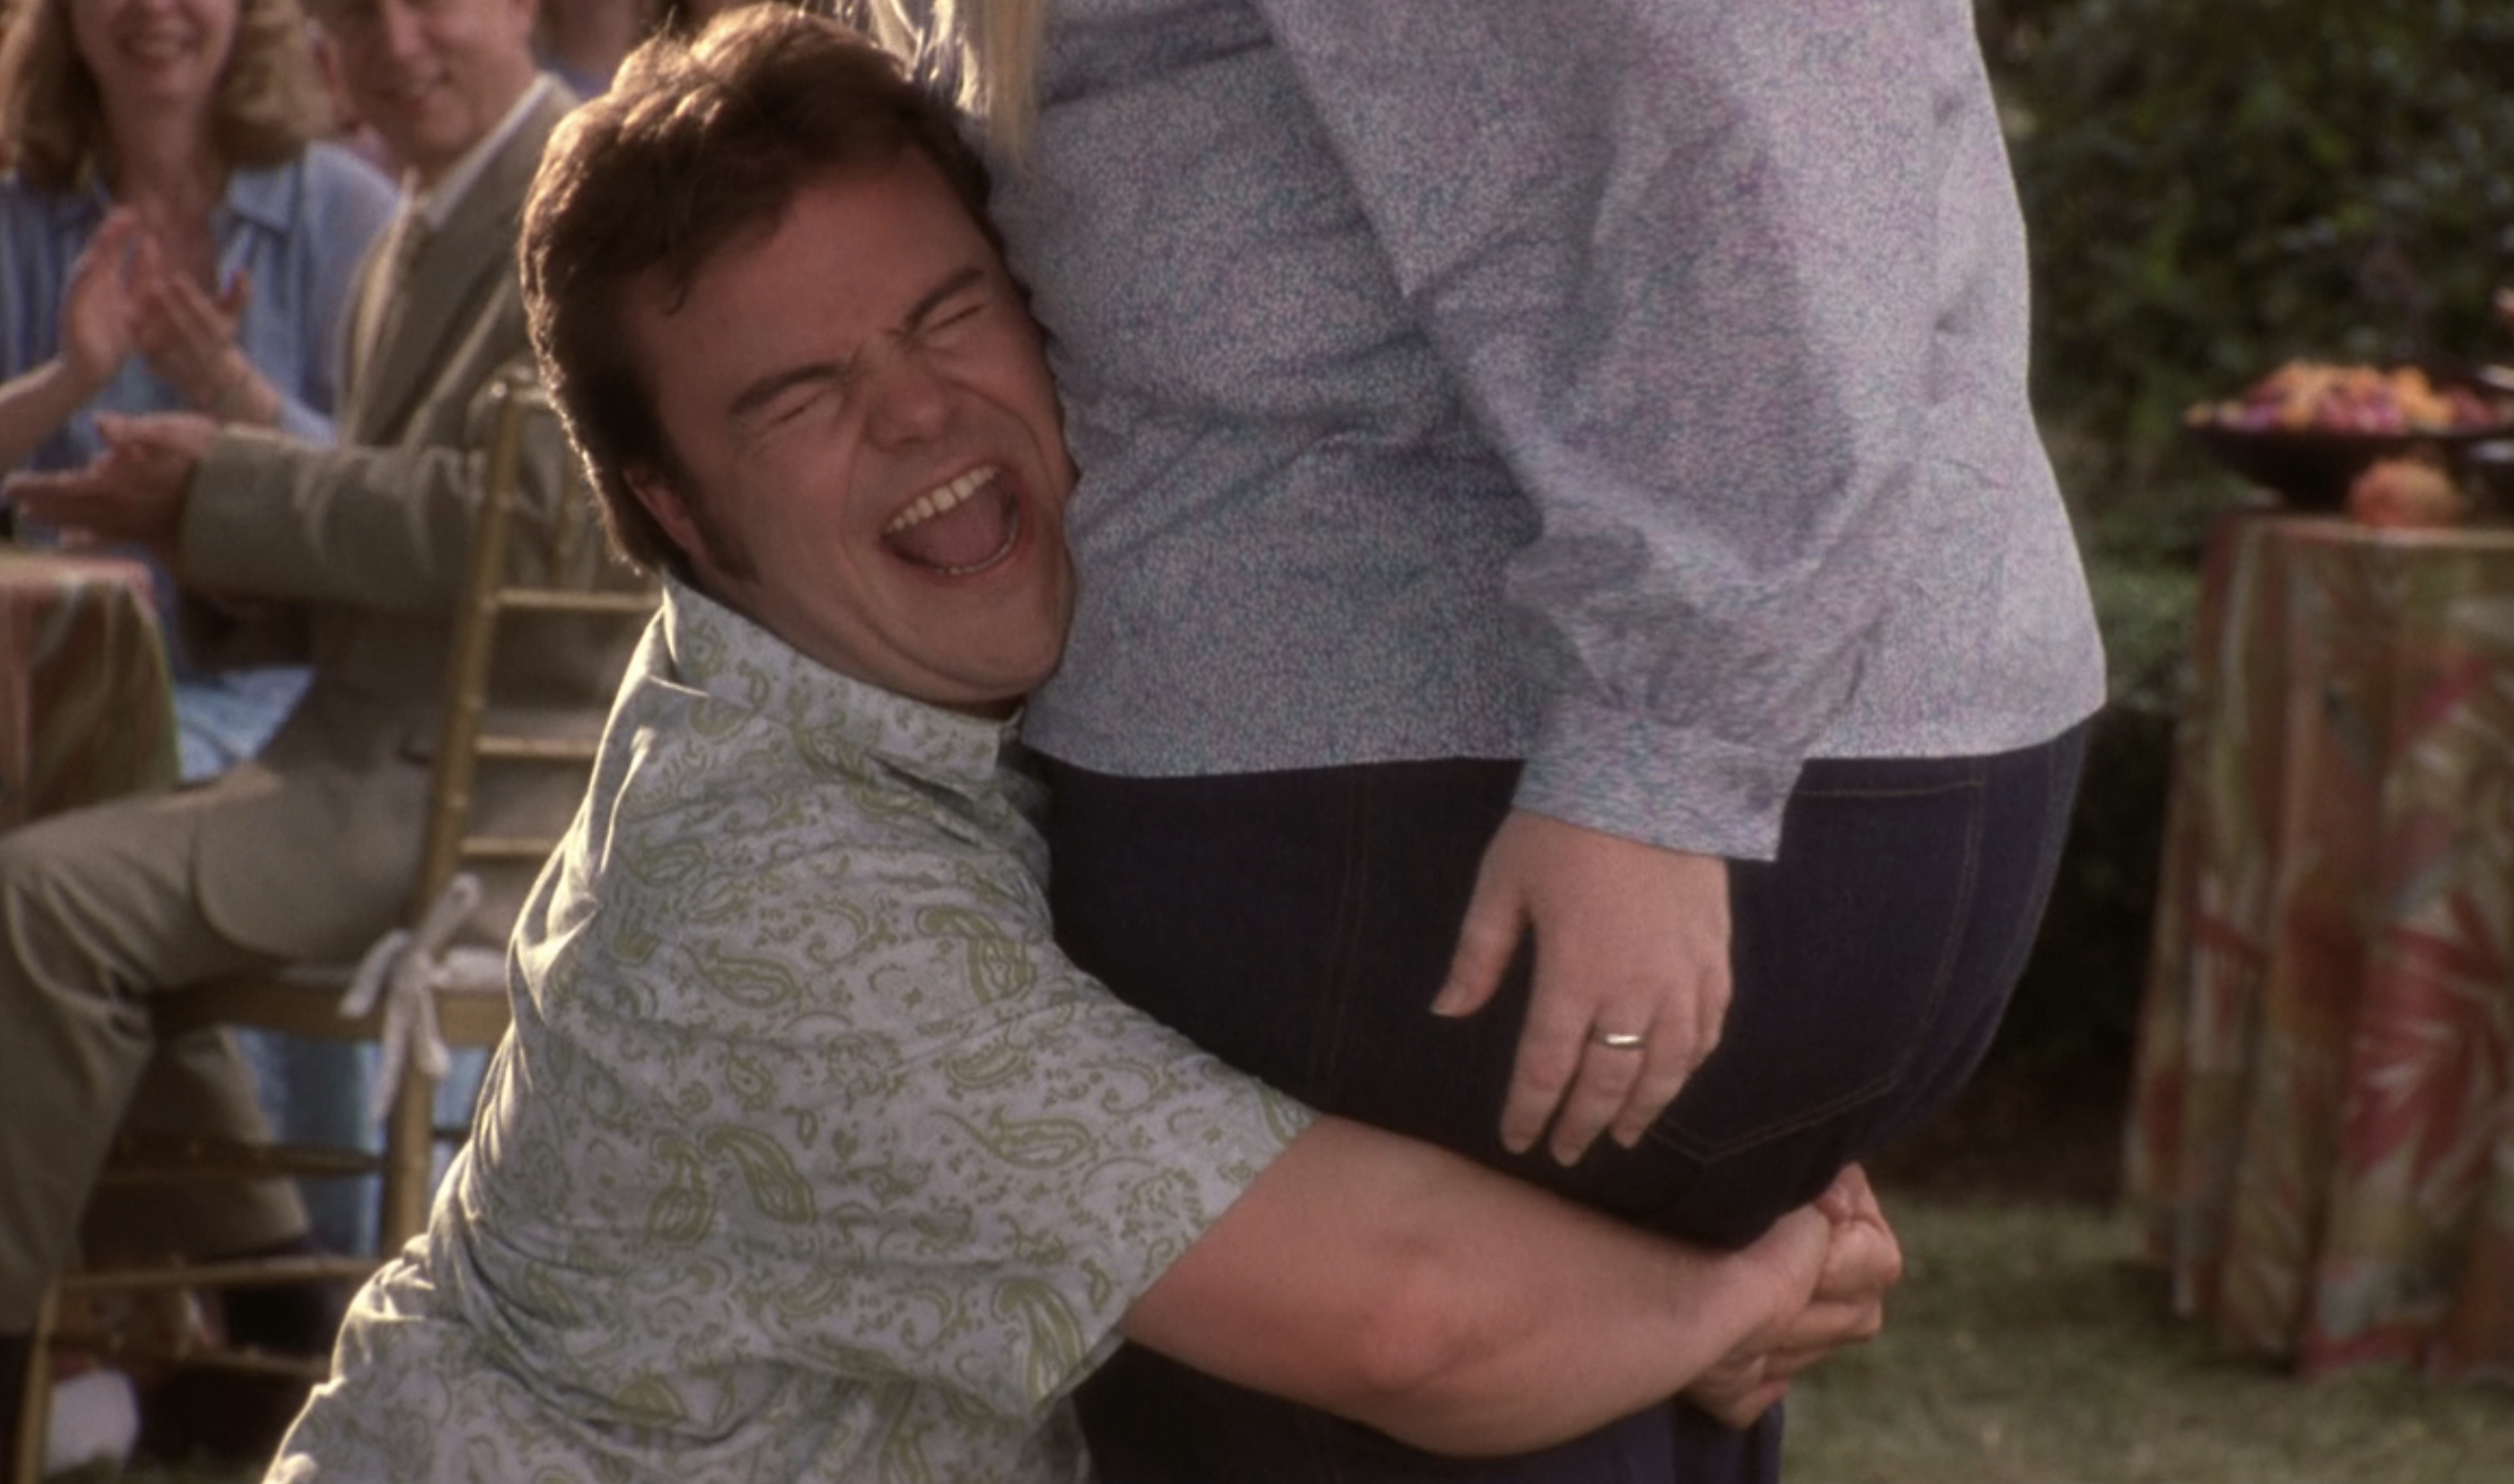 Hal hugging Rosemary &quot;Shallow Hal&quot;